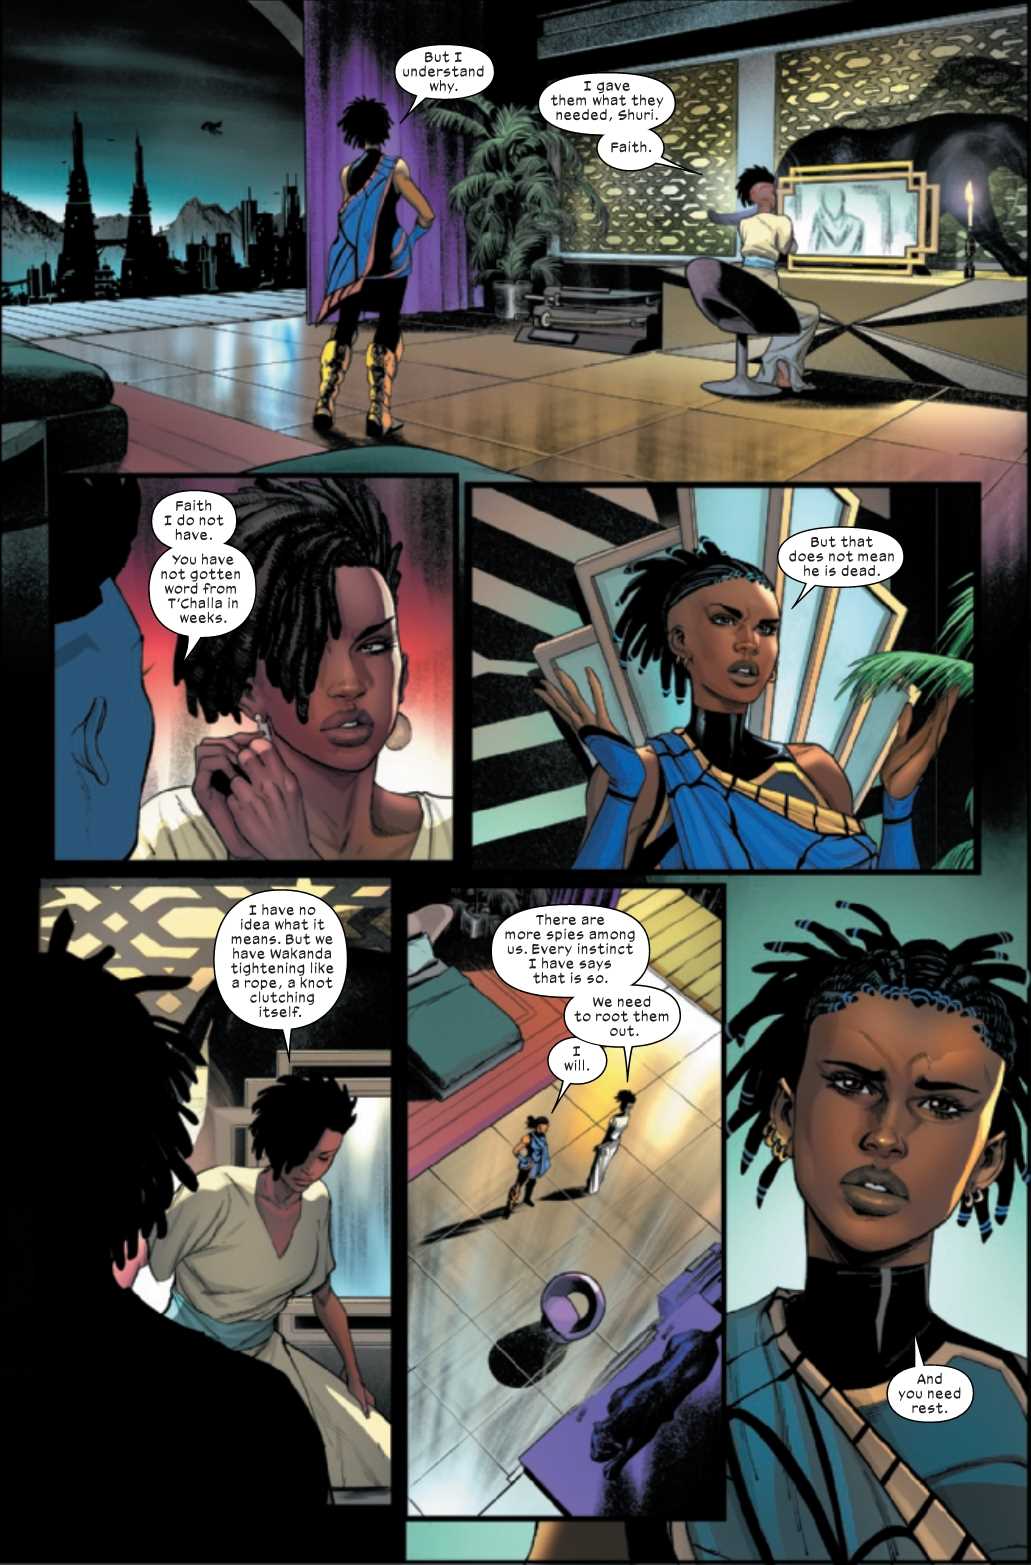 ULTIMATE BLACK PANTHER #4